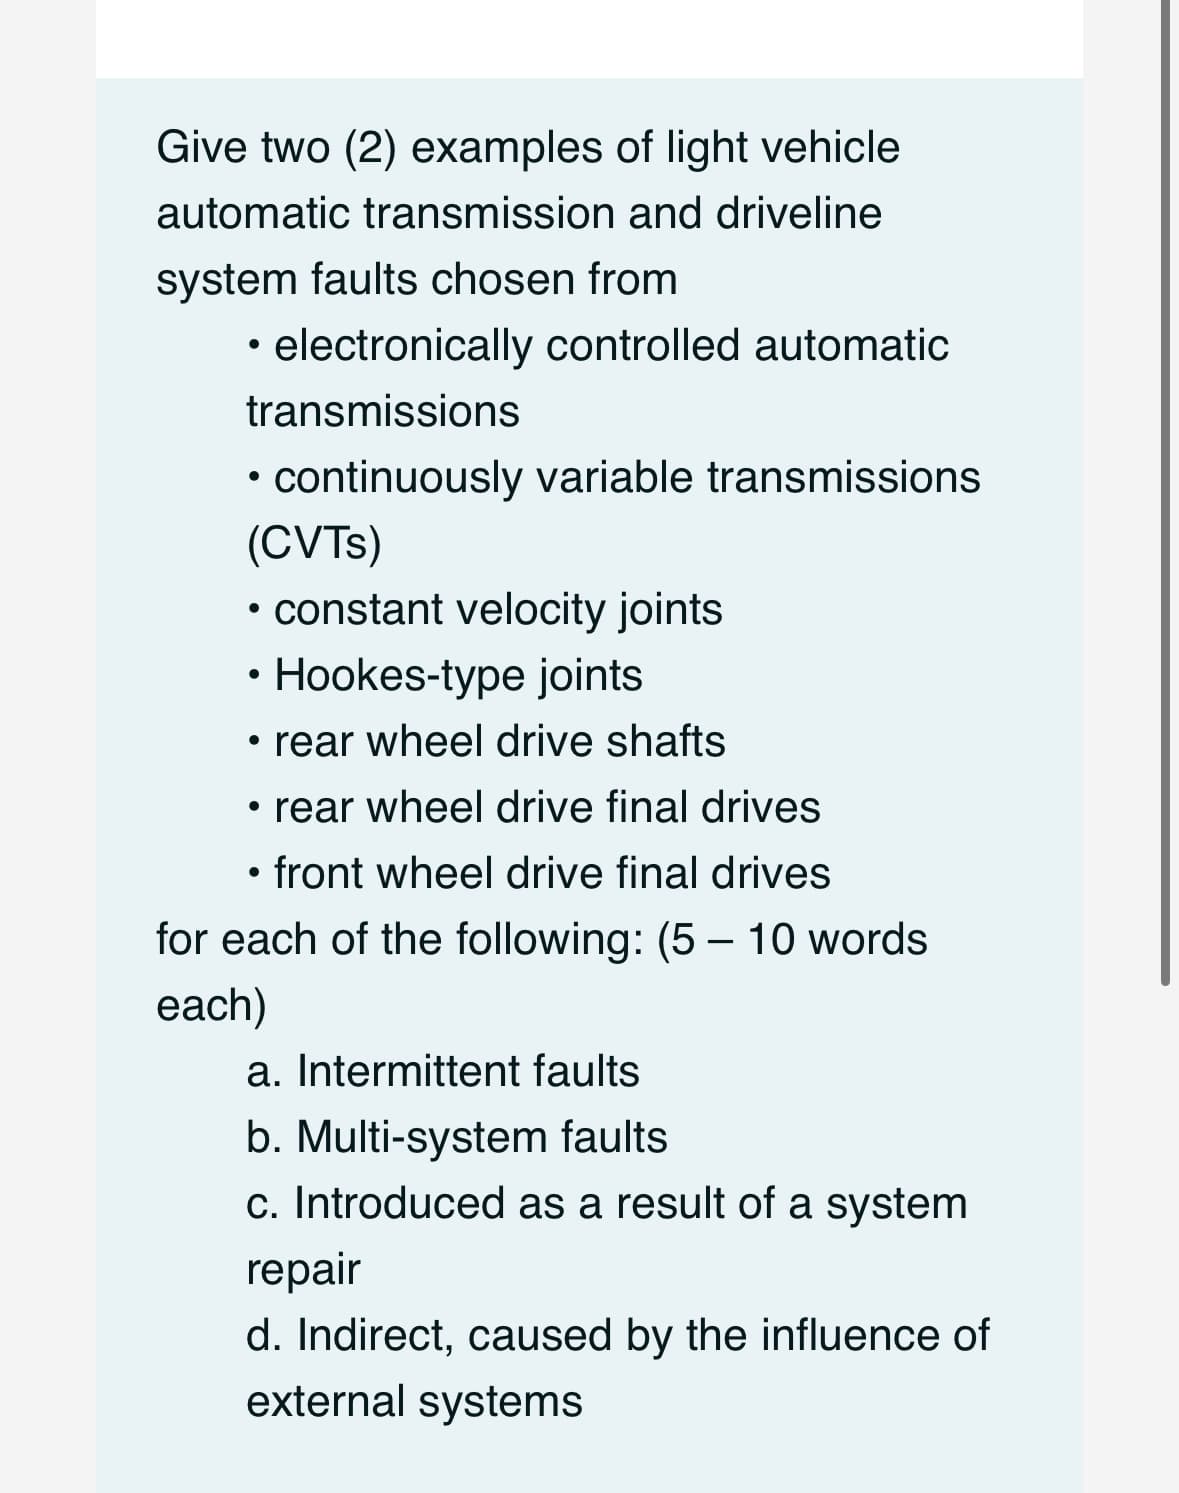 Give two (2) examples of light vehicle
automatic transmission and driveline
system faults chosen from
electronically controlled automatic
transmissions
• continuously variable transmissions
(CVTs)
●
• constant velocity joints
●
Hookes-type joints
• rear wheel drive shafts
• rear wheel drive final drives
• front wheel drive final drives
for each of the following: (5-10 words
each)
a. Intermittent faults
b. Multi-system faults
c. Introduced as a result of a system
repair
d. Indirect, caused by the influence of
external systems